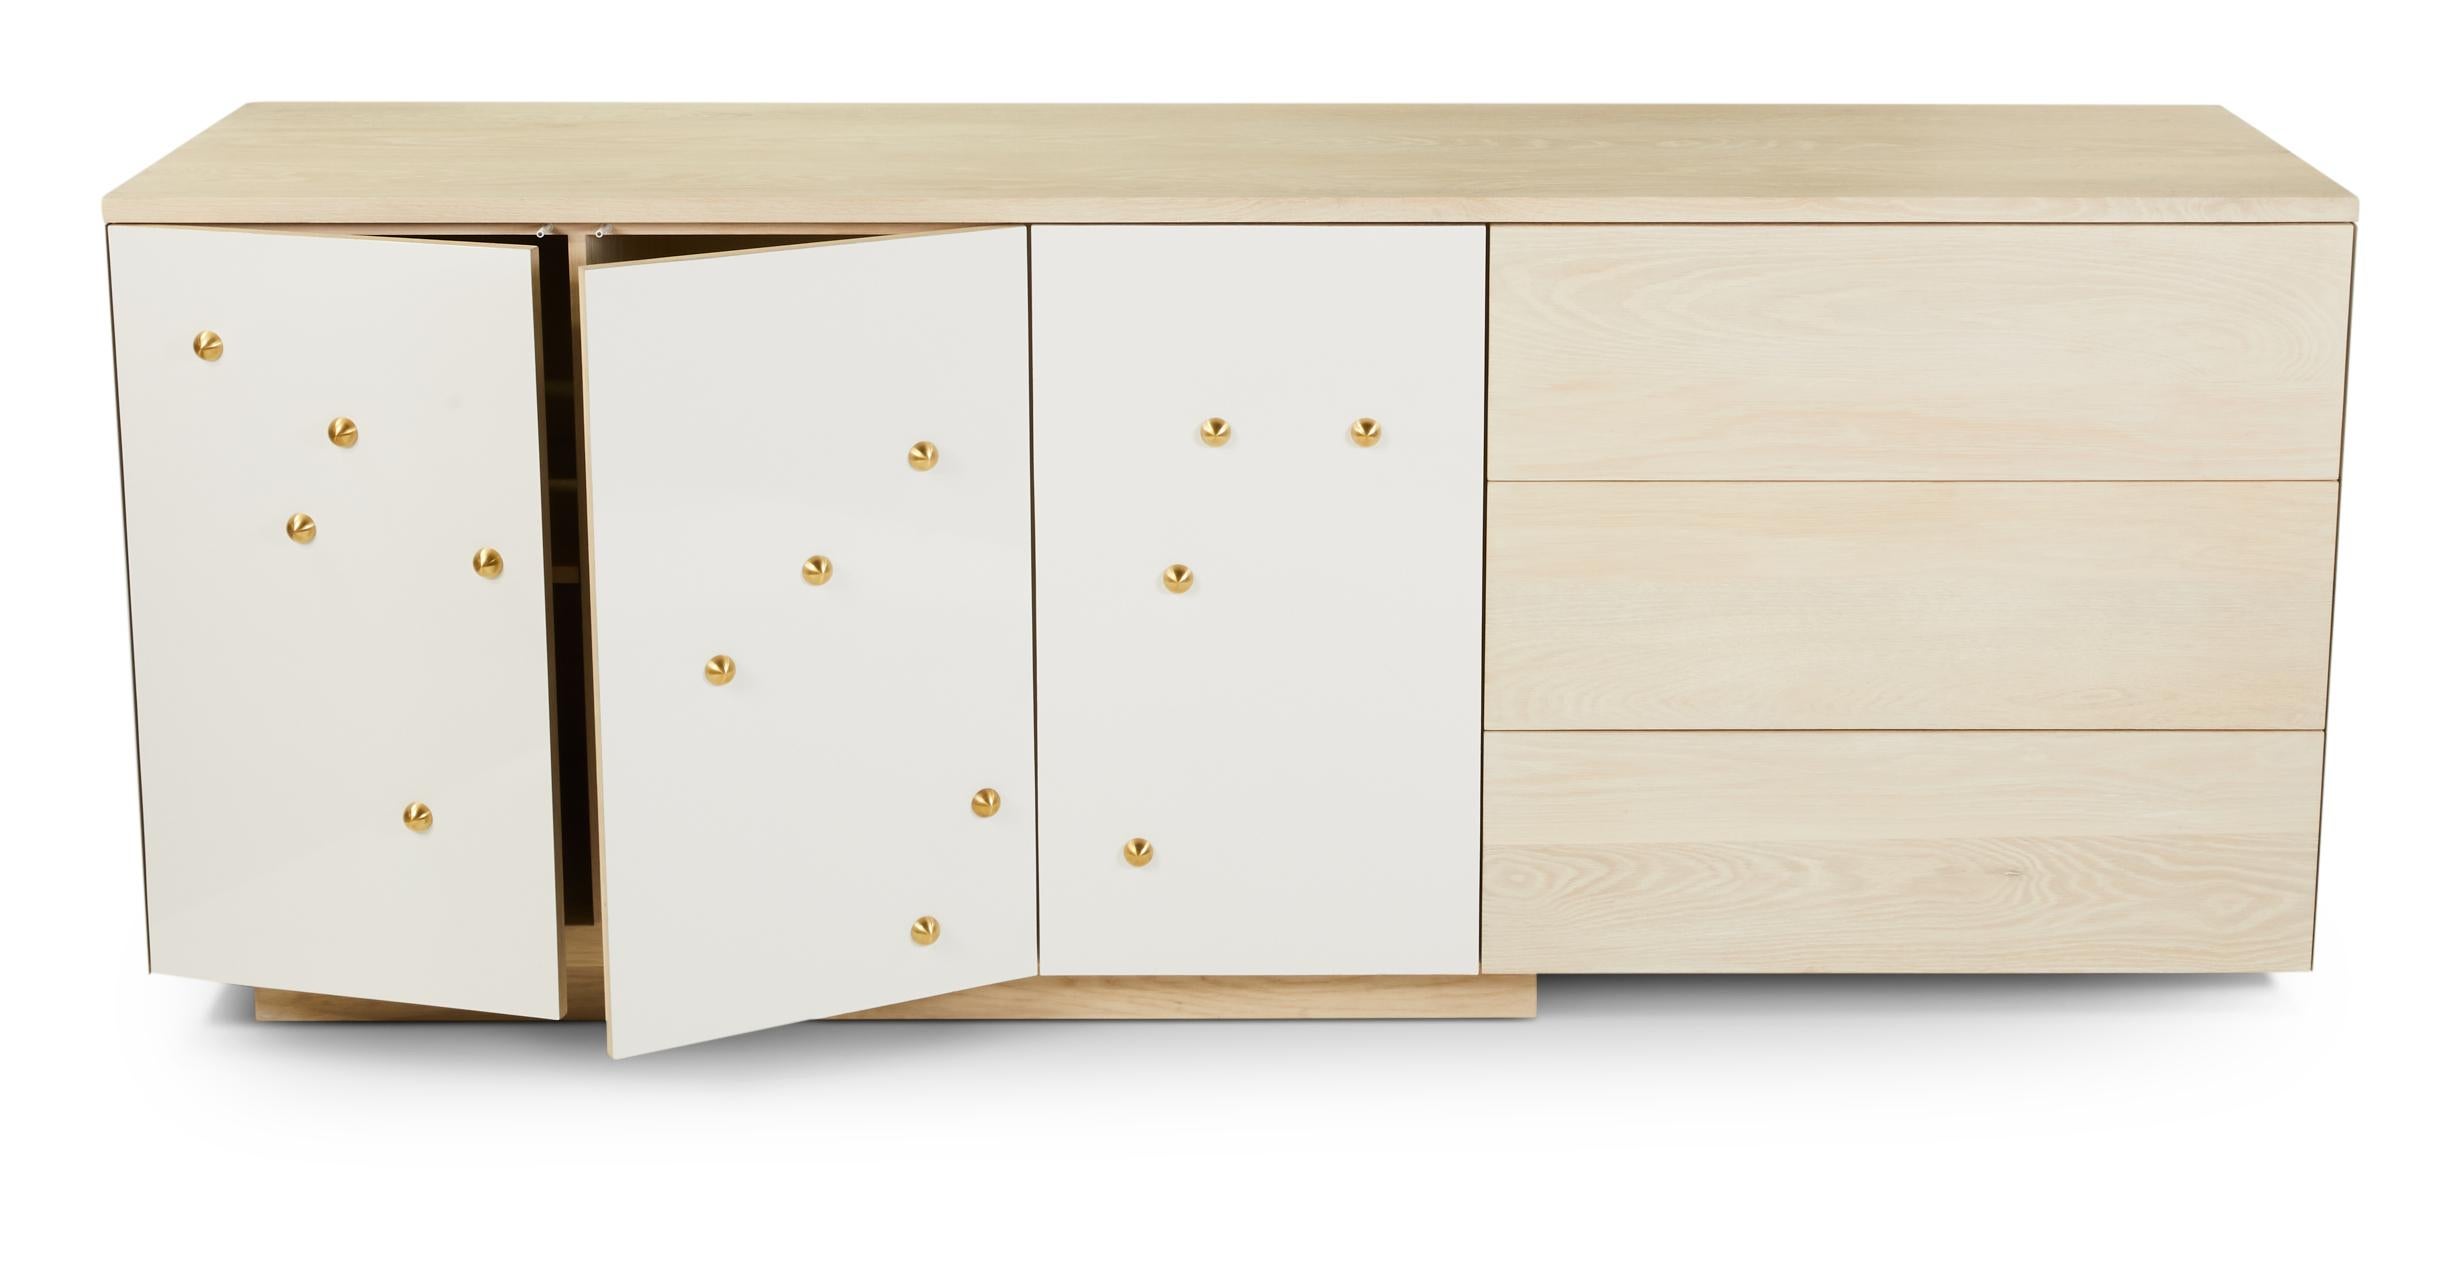 C-210WB is a variation on the studio's popular C-210 model. The counter-top, drawers and interior are made from white oak with a bleached and white stained oil finish. The remainder of the piece is clad in powder-coated white aluminum and features